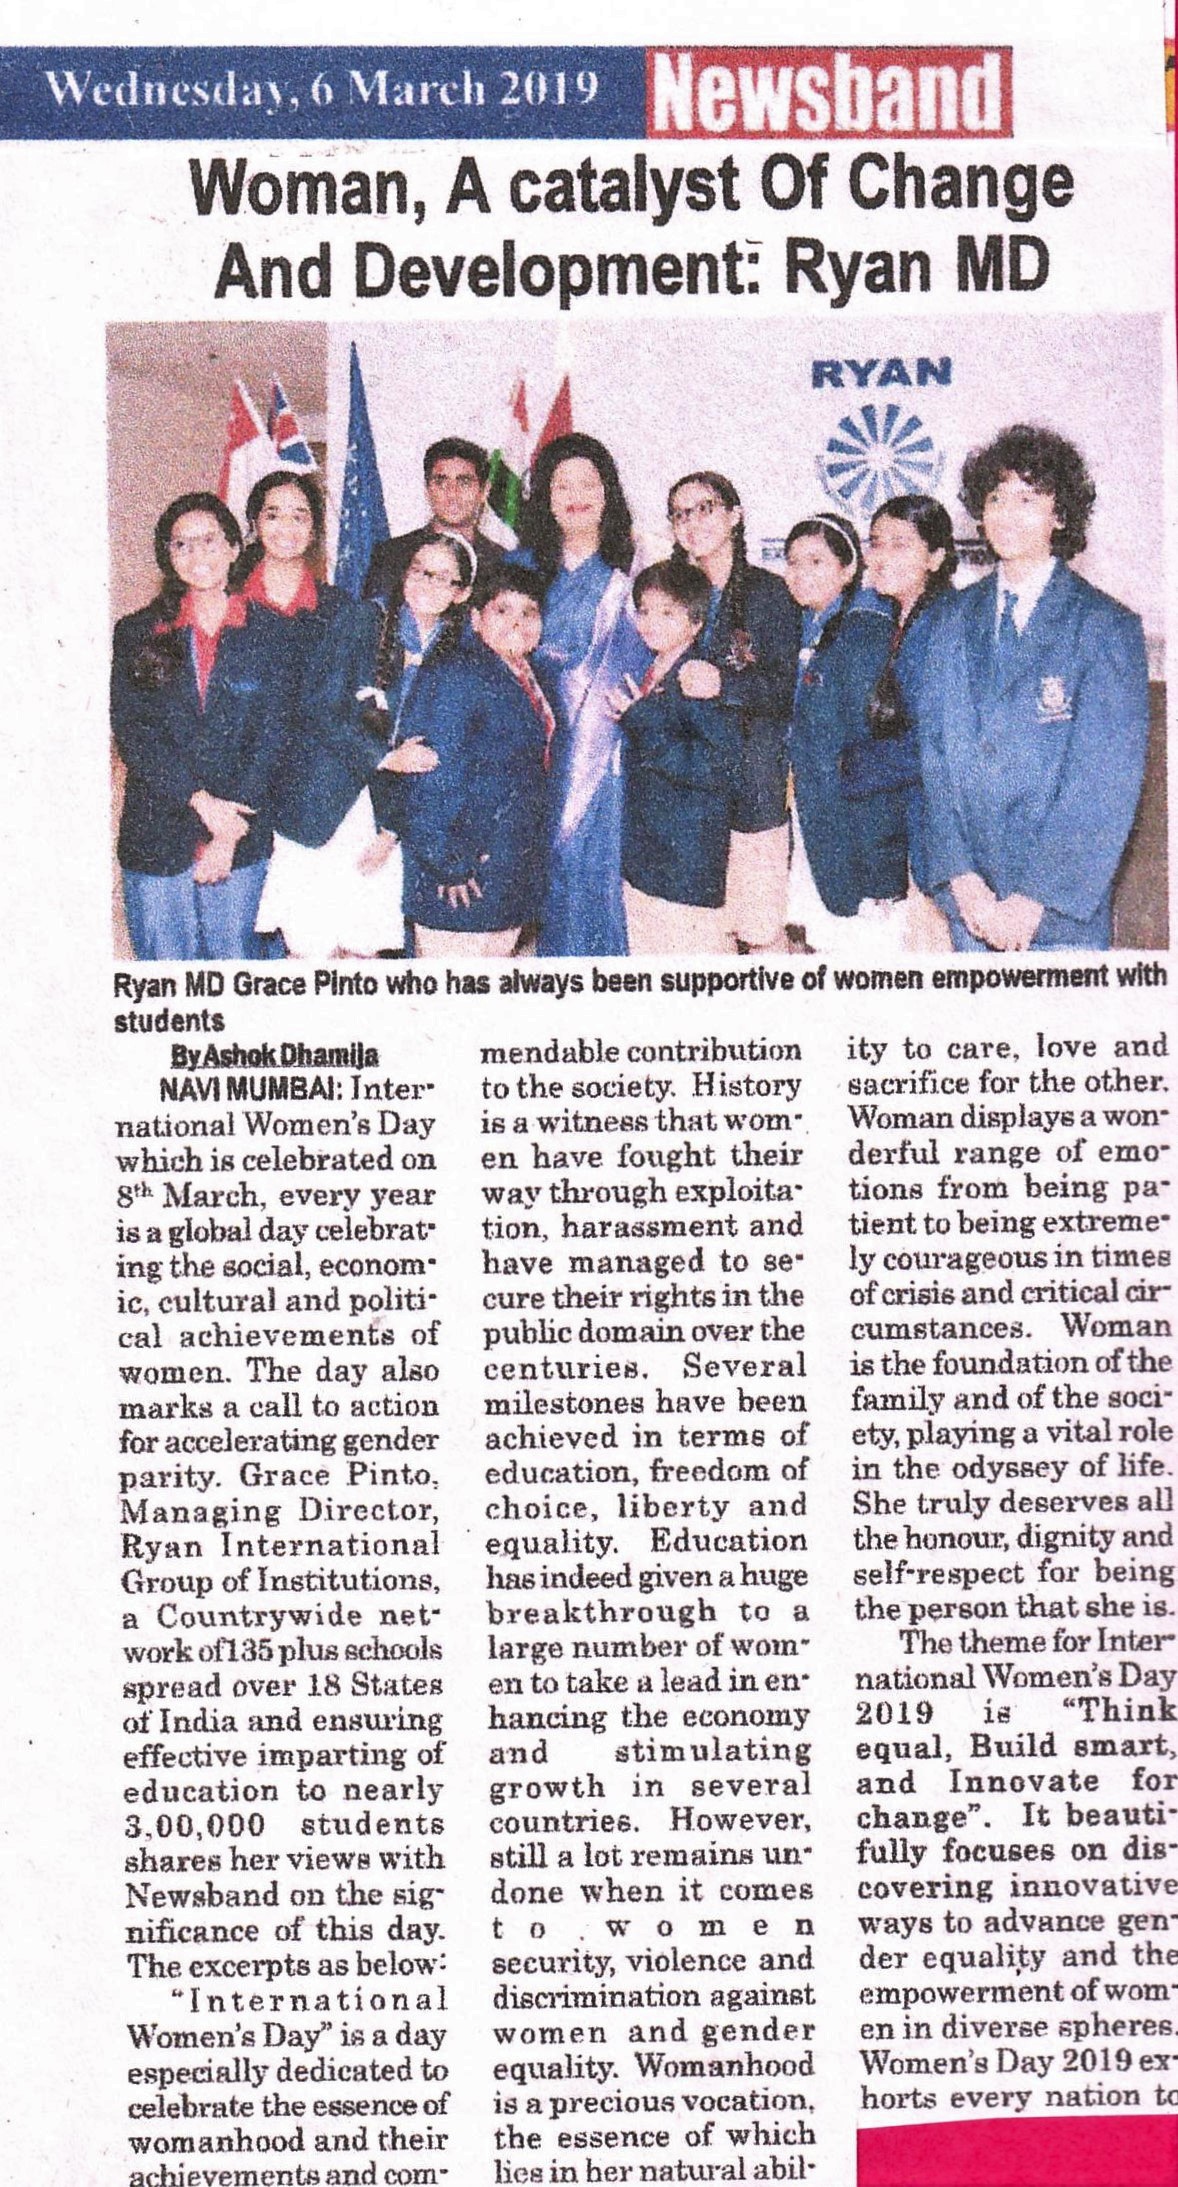 Women A catalyst of change and development was mentioned in Newsband - Ryan International School, Kharghar